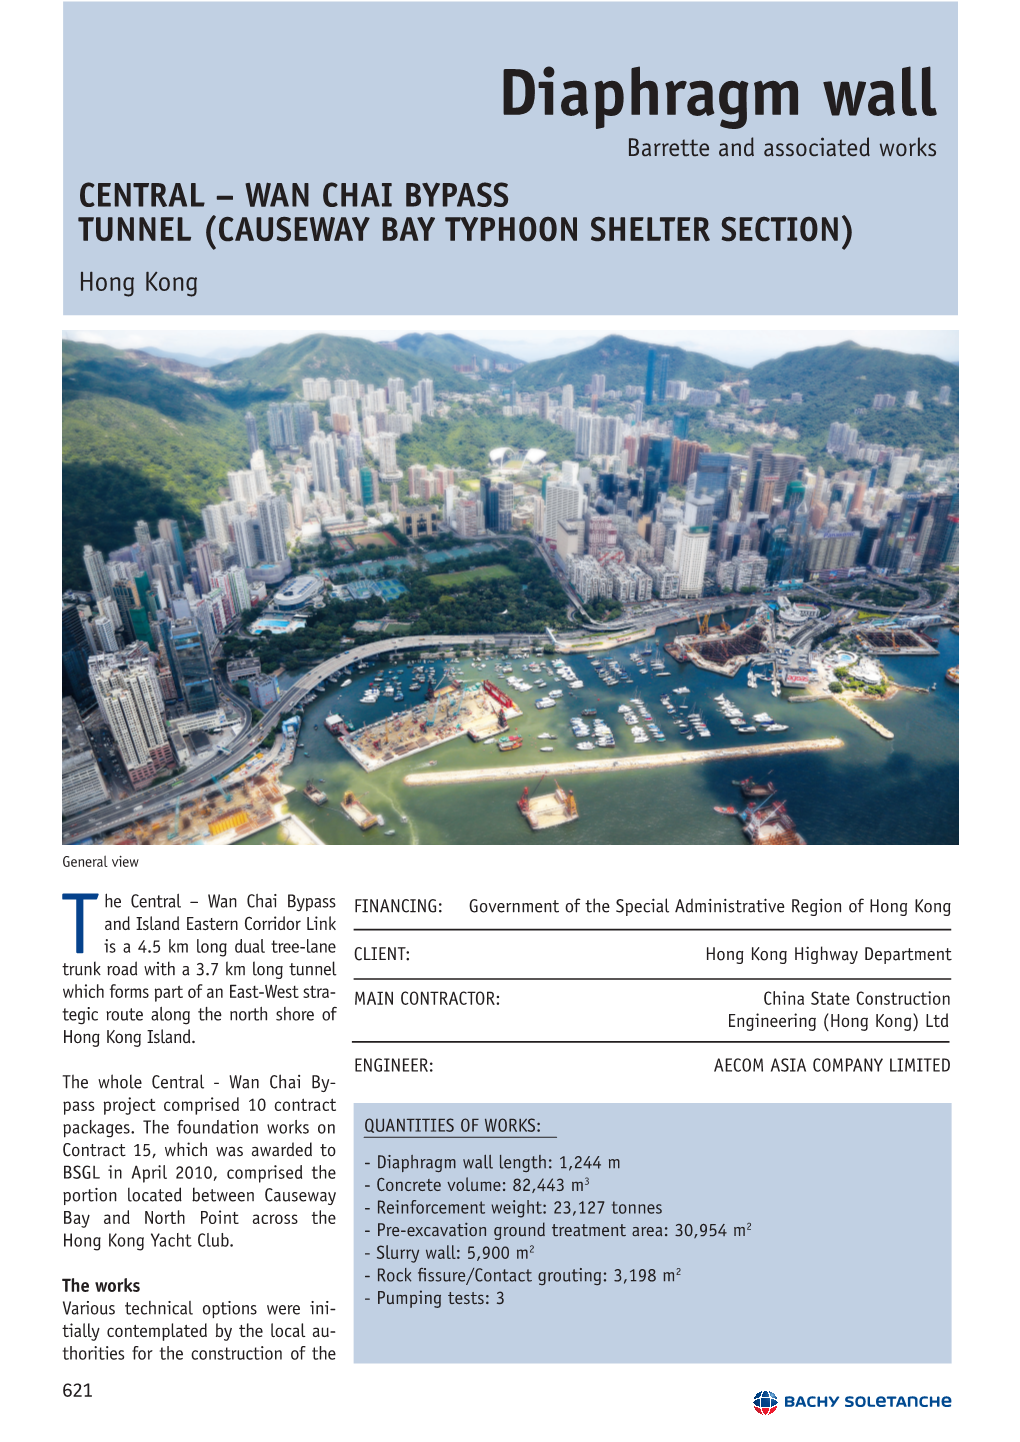 Diaphragm Wall Barrette and Associated Works CENTRAL – WAN CHAI BYPASS TUNNEL (CAUSEWAY BAY TYPHOON SHELTER SECTION) Hong Kong